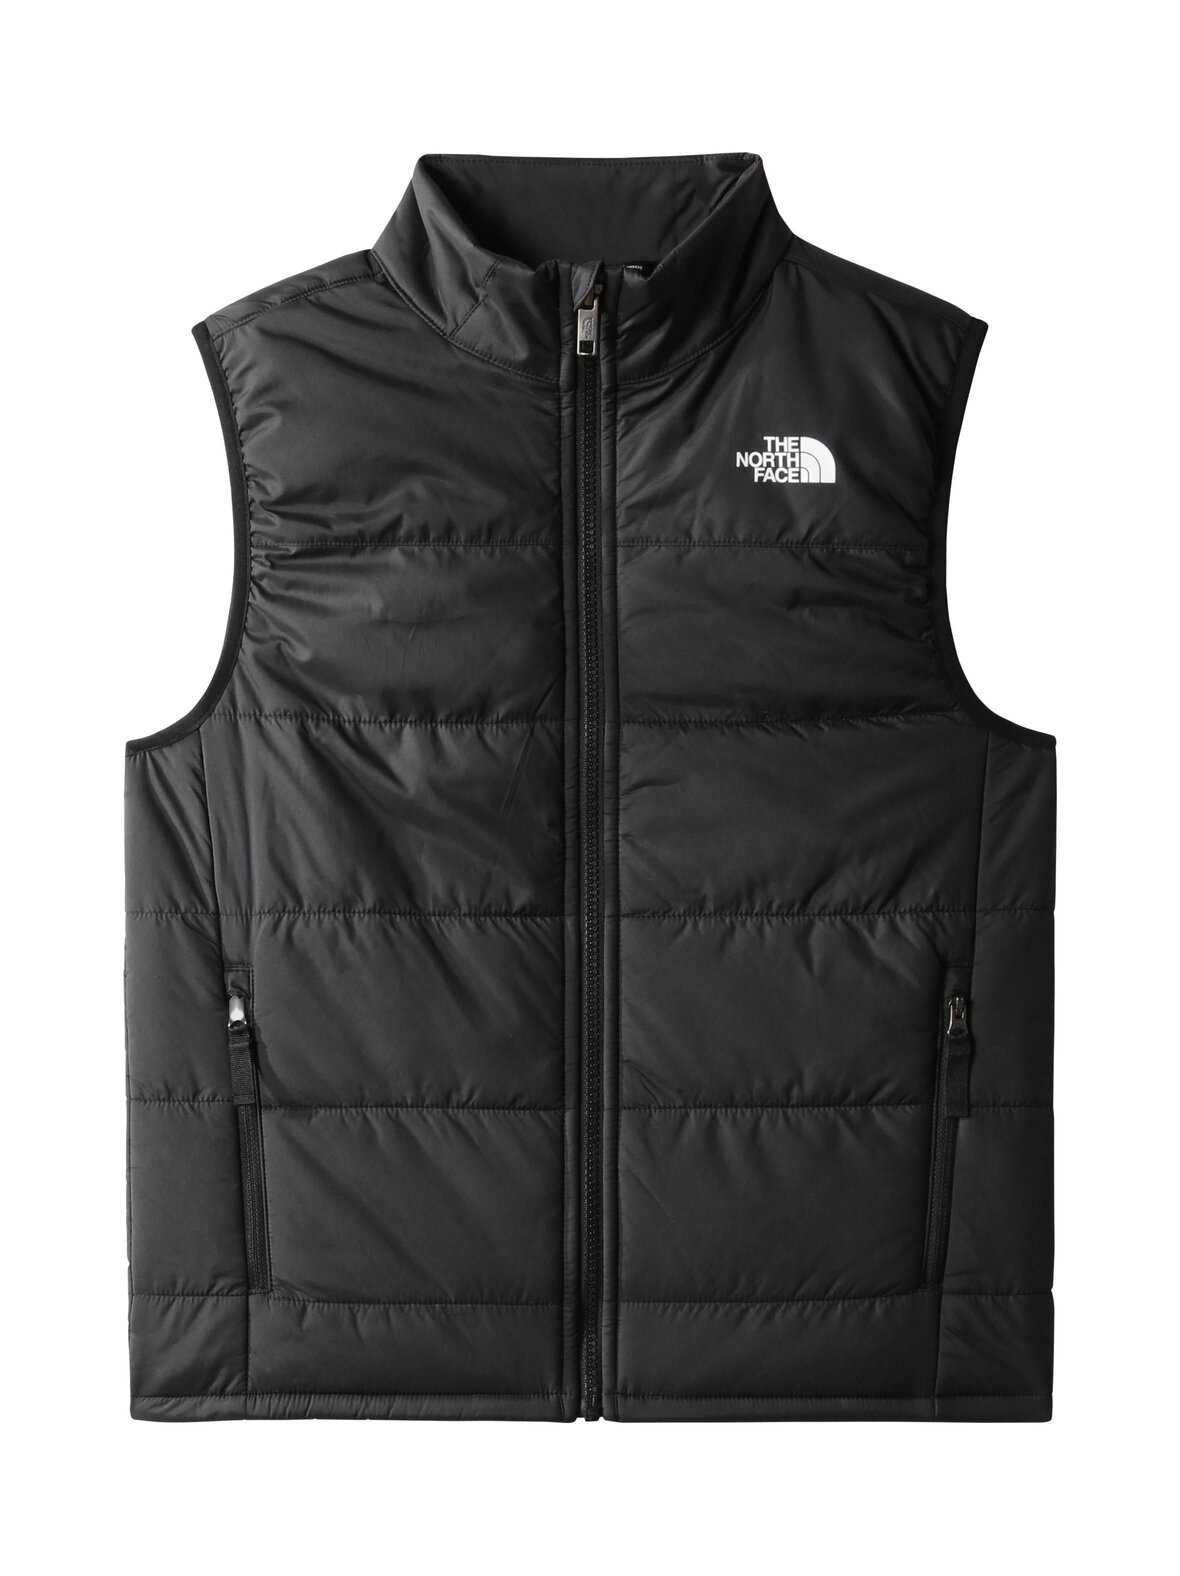 The North Face Never stop -liivi